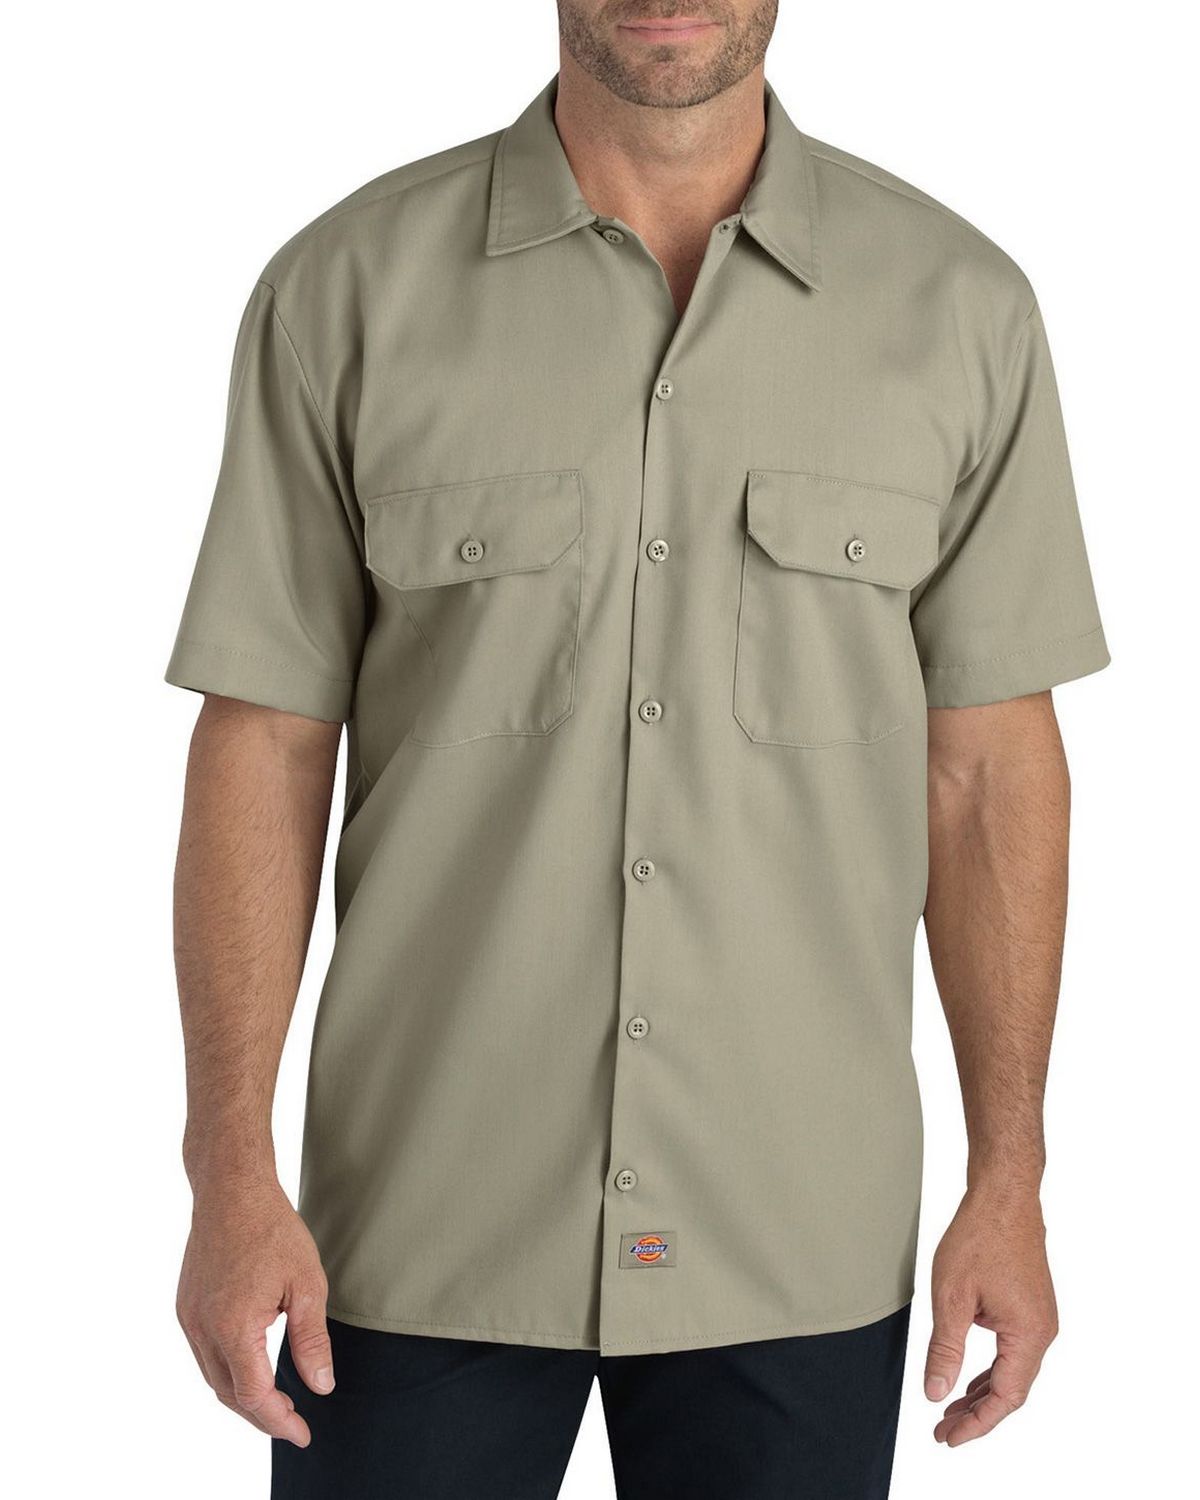 Dickies WS675 Mens FLEX Relaxed Fit Short-Sleeve Twill Work Shirt